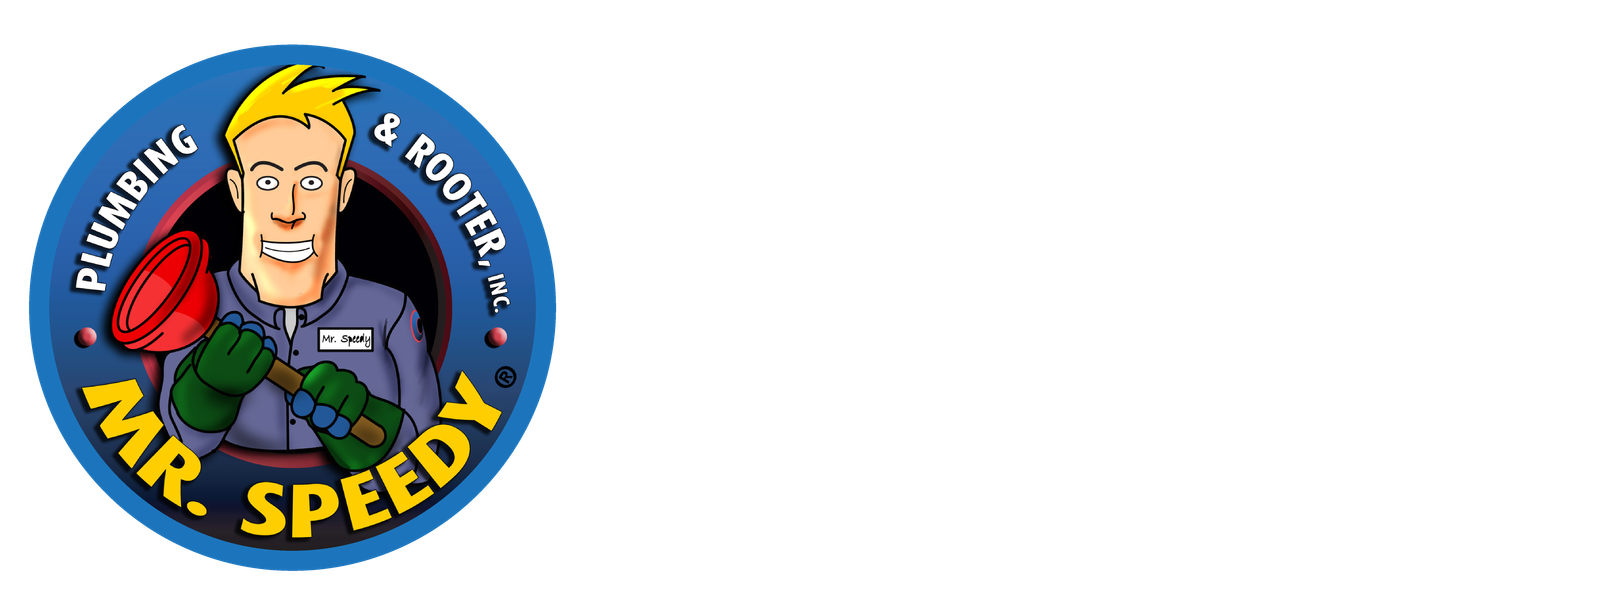 affordable-los-angeles-plumbing-drain-cleaning-services